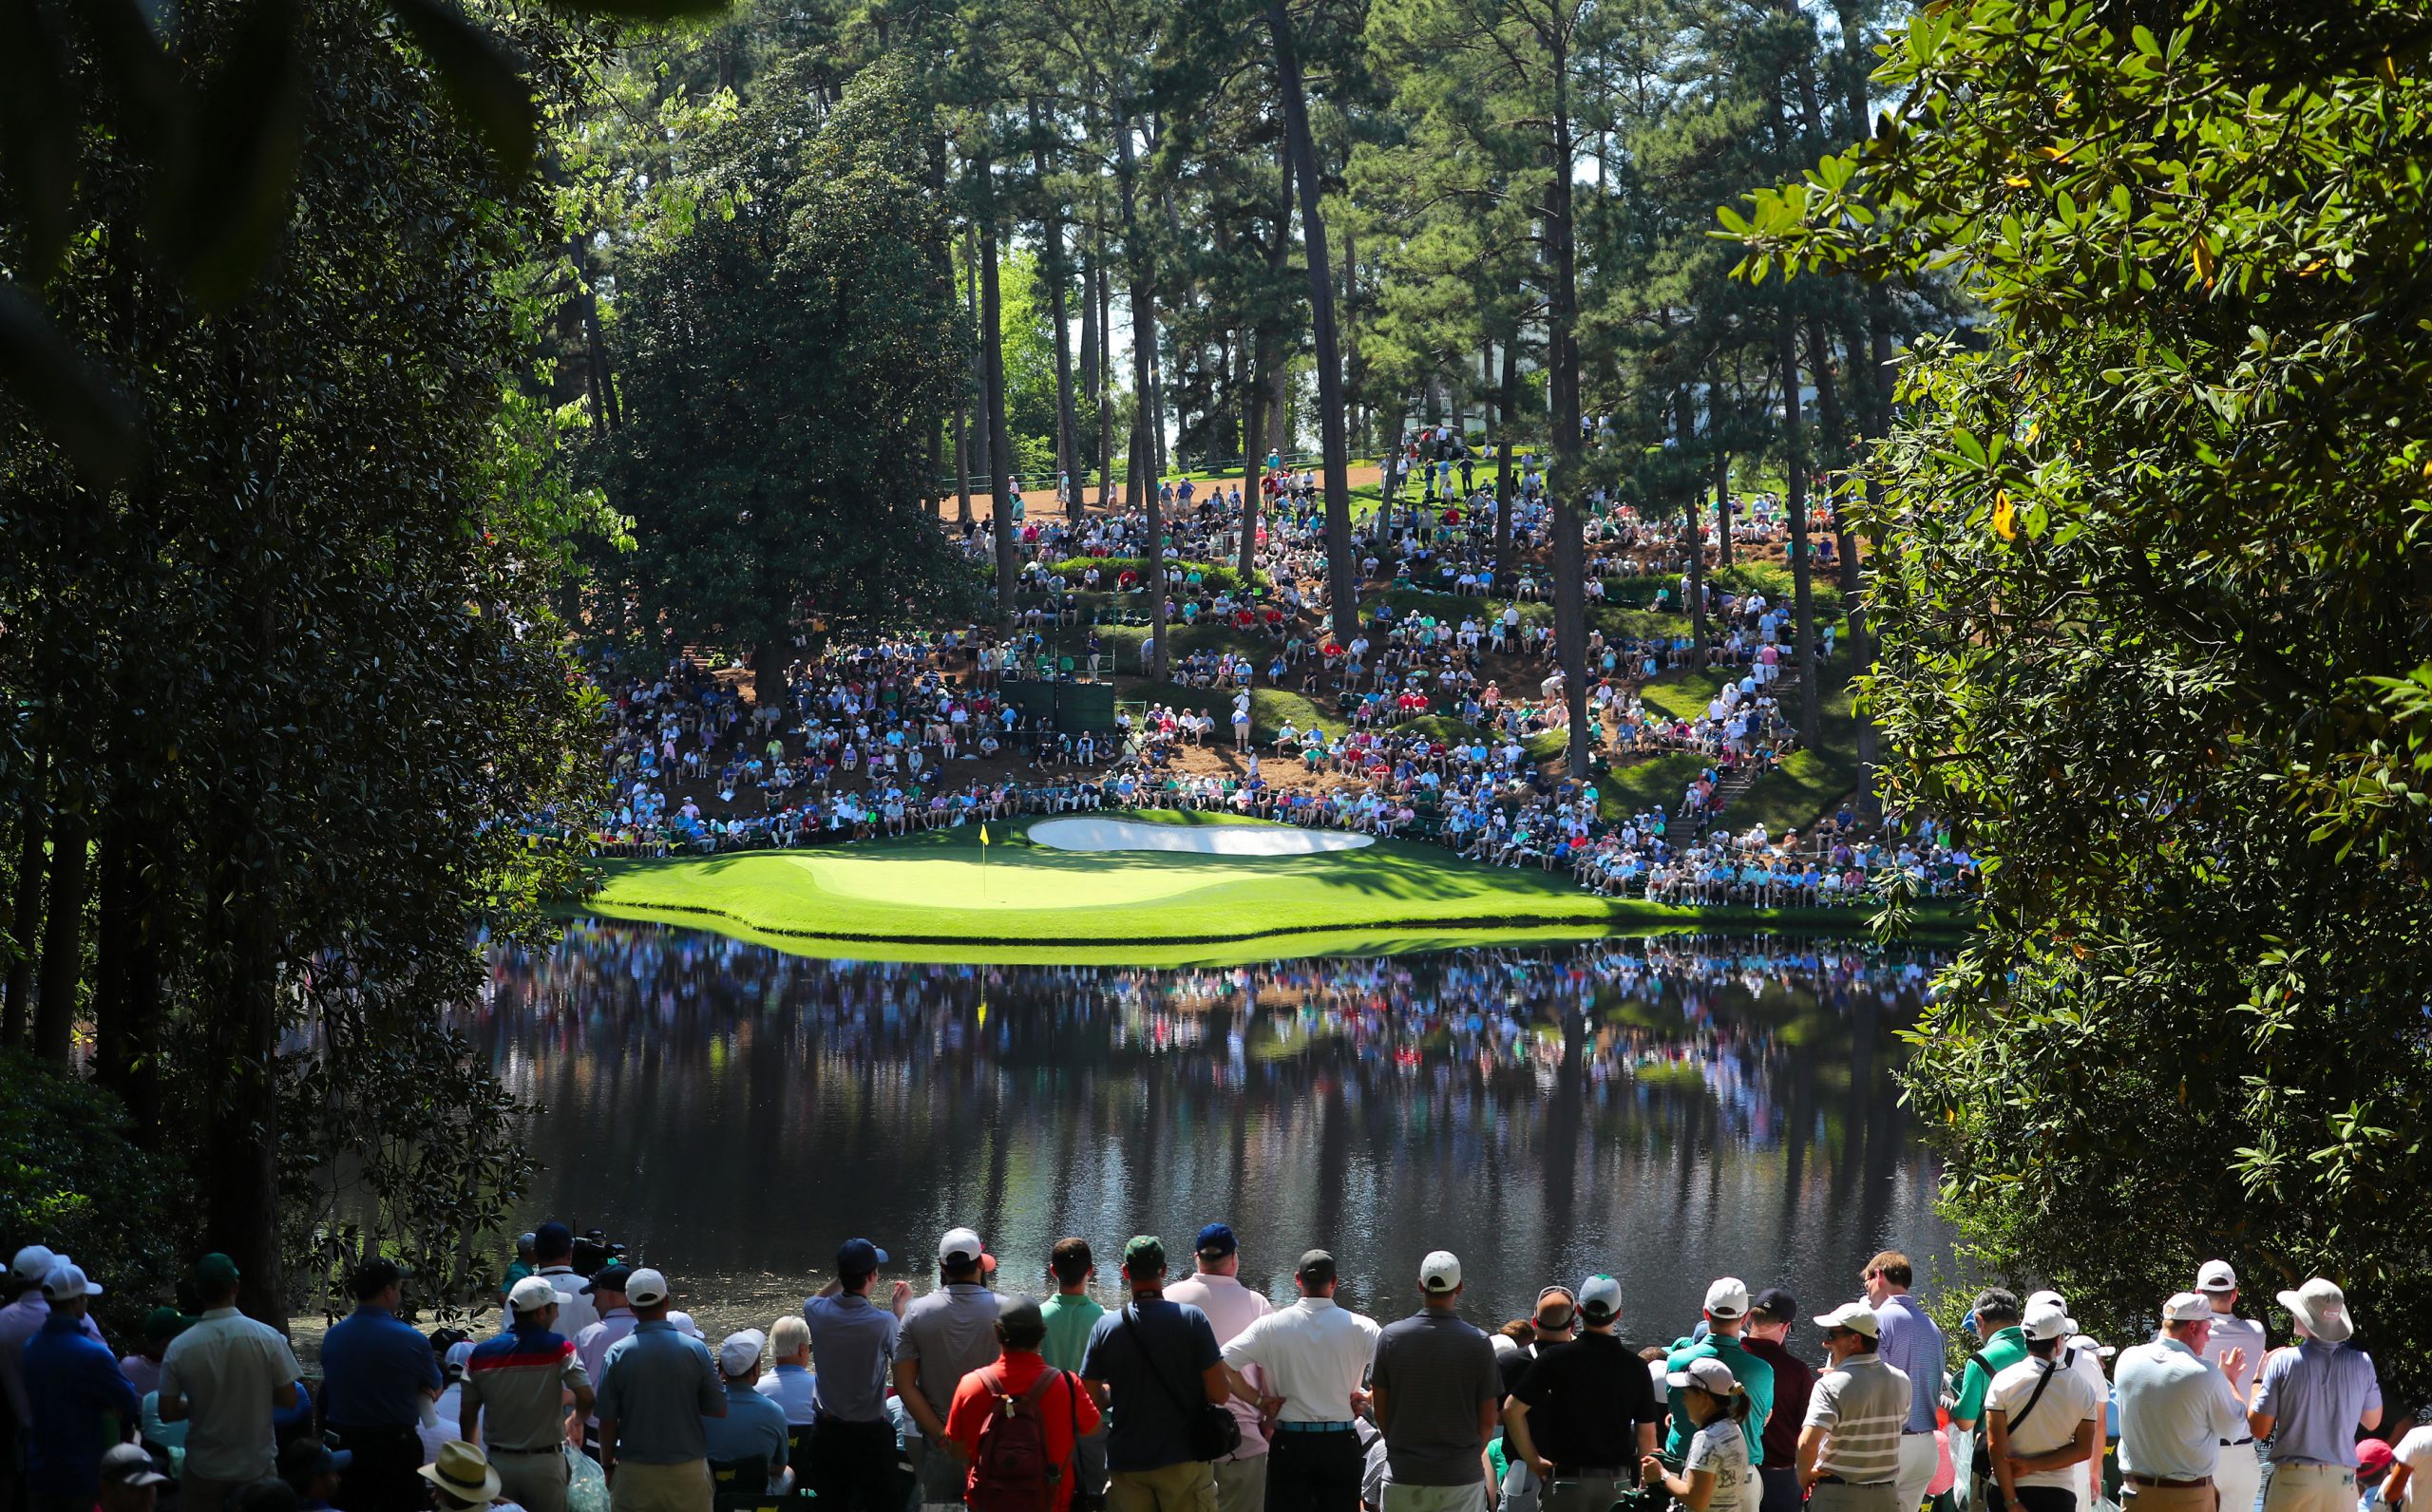 AUGUSTA, GEORGIA - APRIL 10: A general view during the Par 3 Contest prior to the Masters at Augusta National Golf Club on April 10, 2019 in Augusta, Georgia. (Photo by David Cannon/Getty Images)